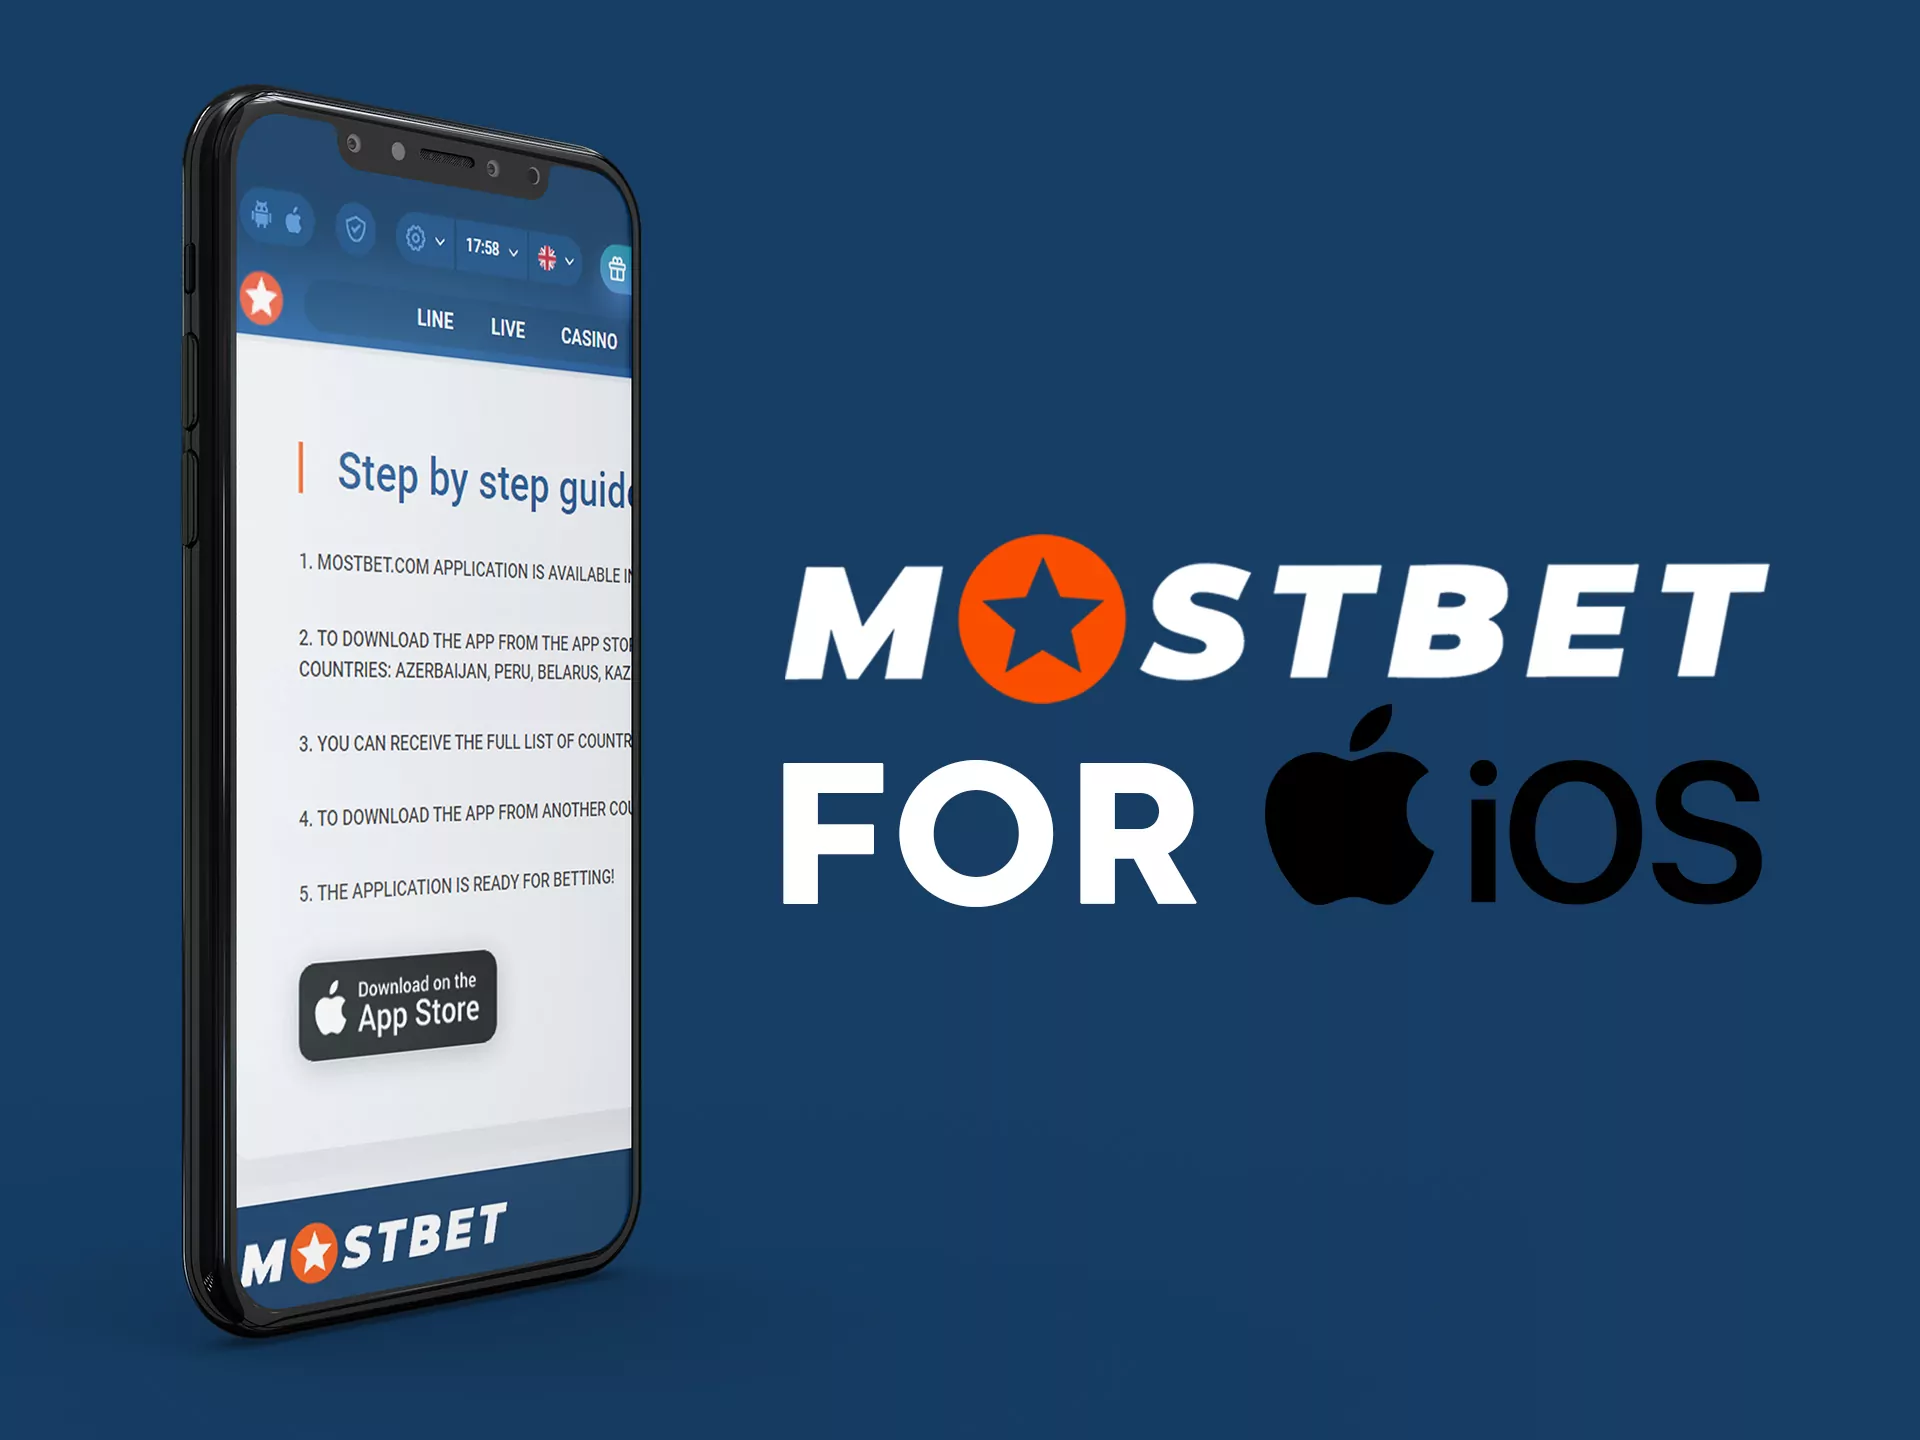 Mostbet app is available on the App Store and can be downloded from there.